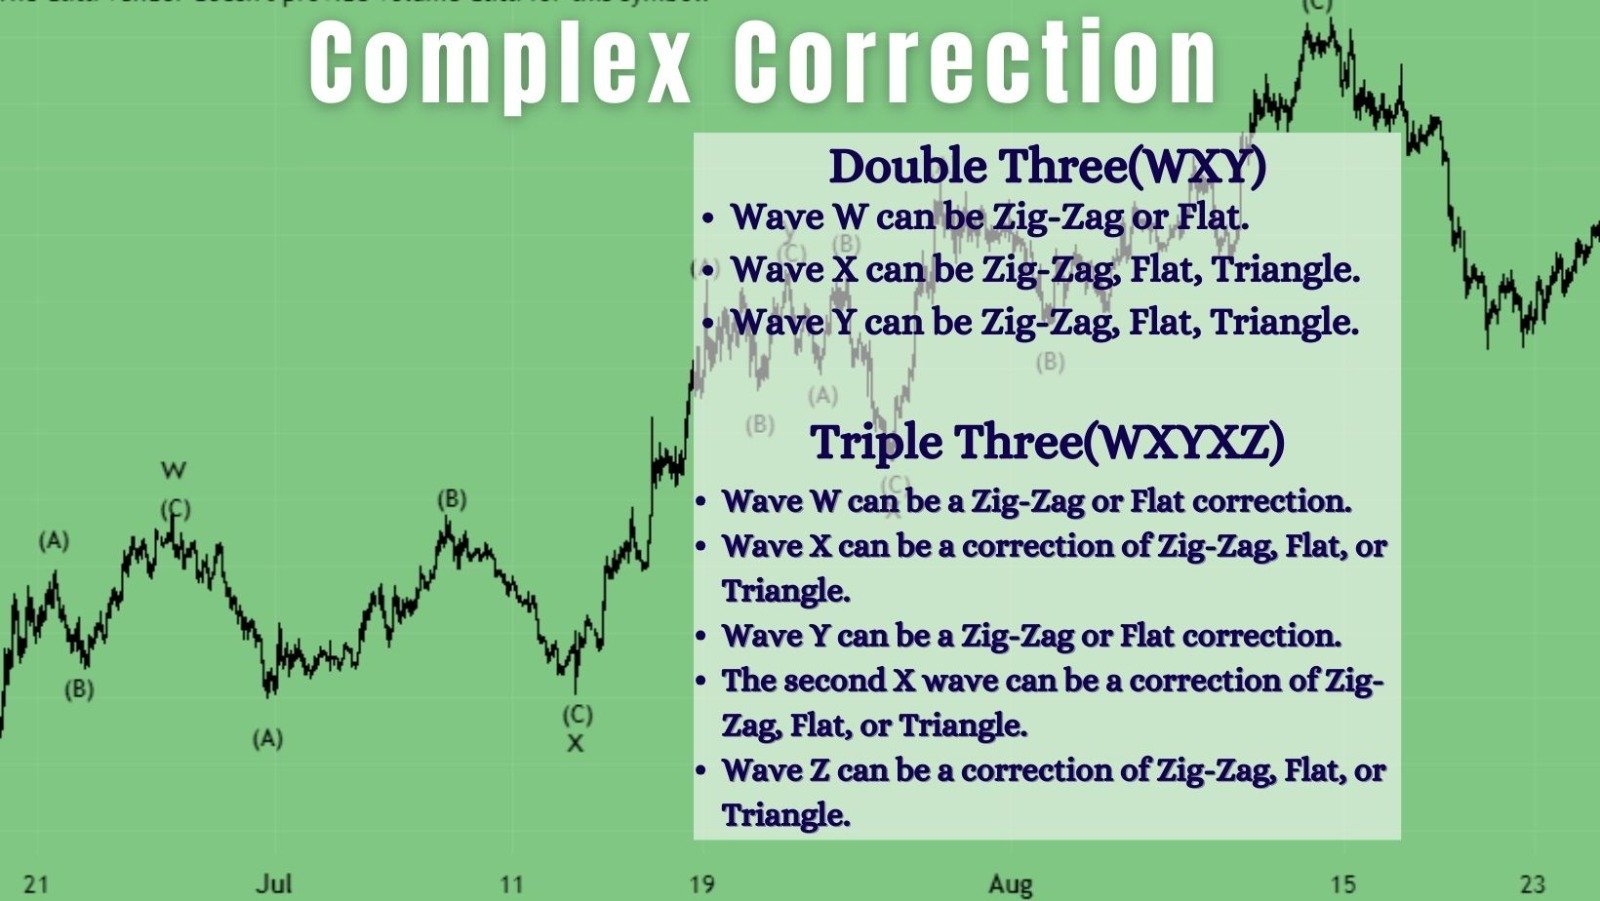 Complex Correction in Elliott Wave #Characteristics, Patterns and Rules